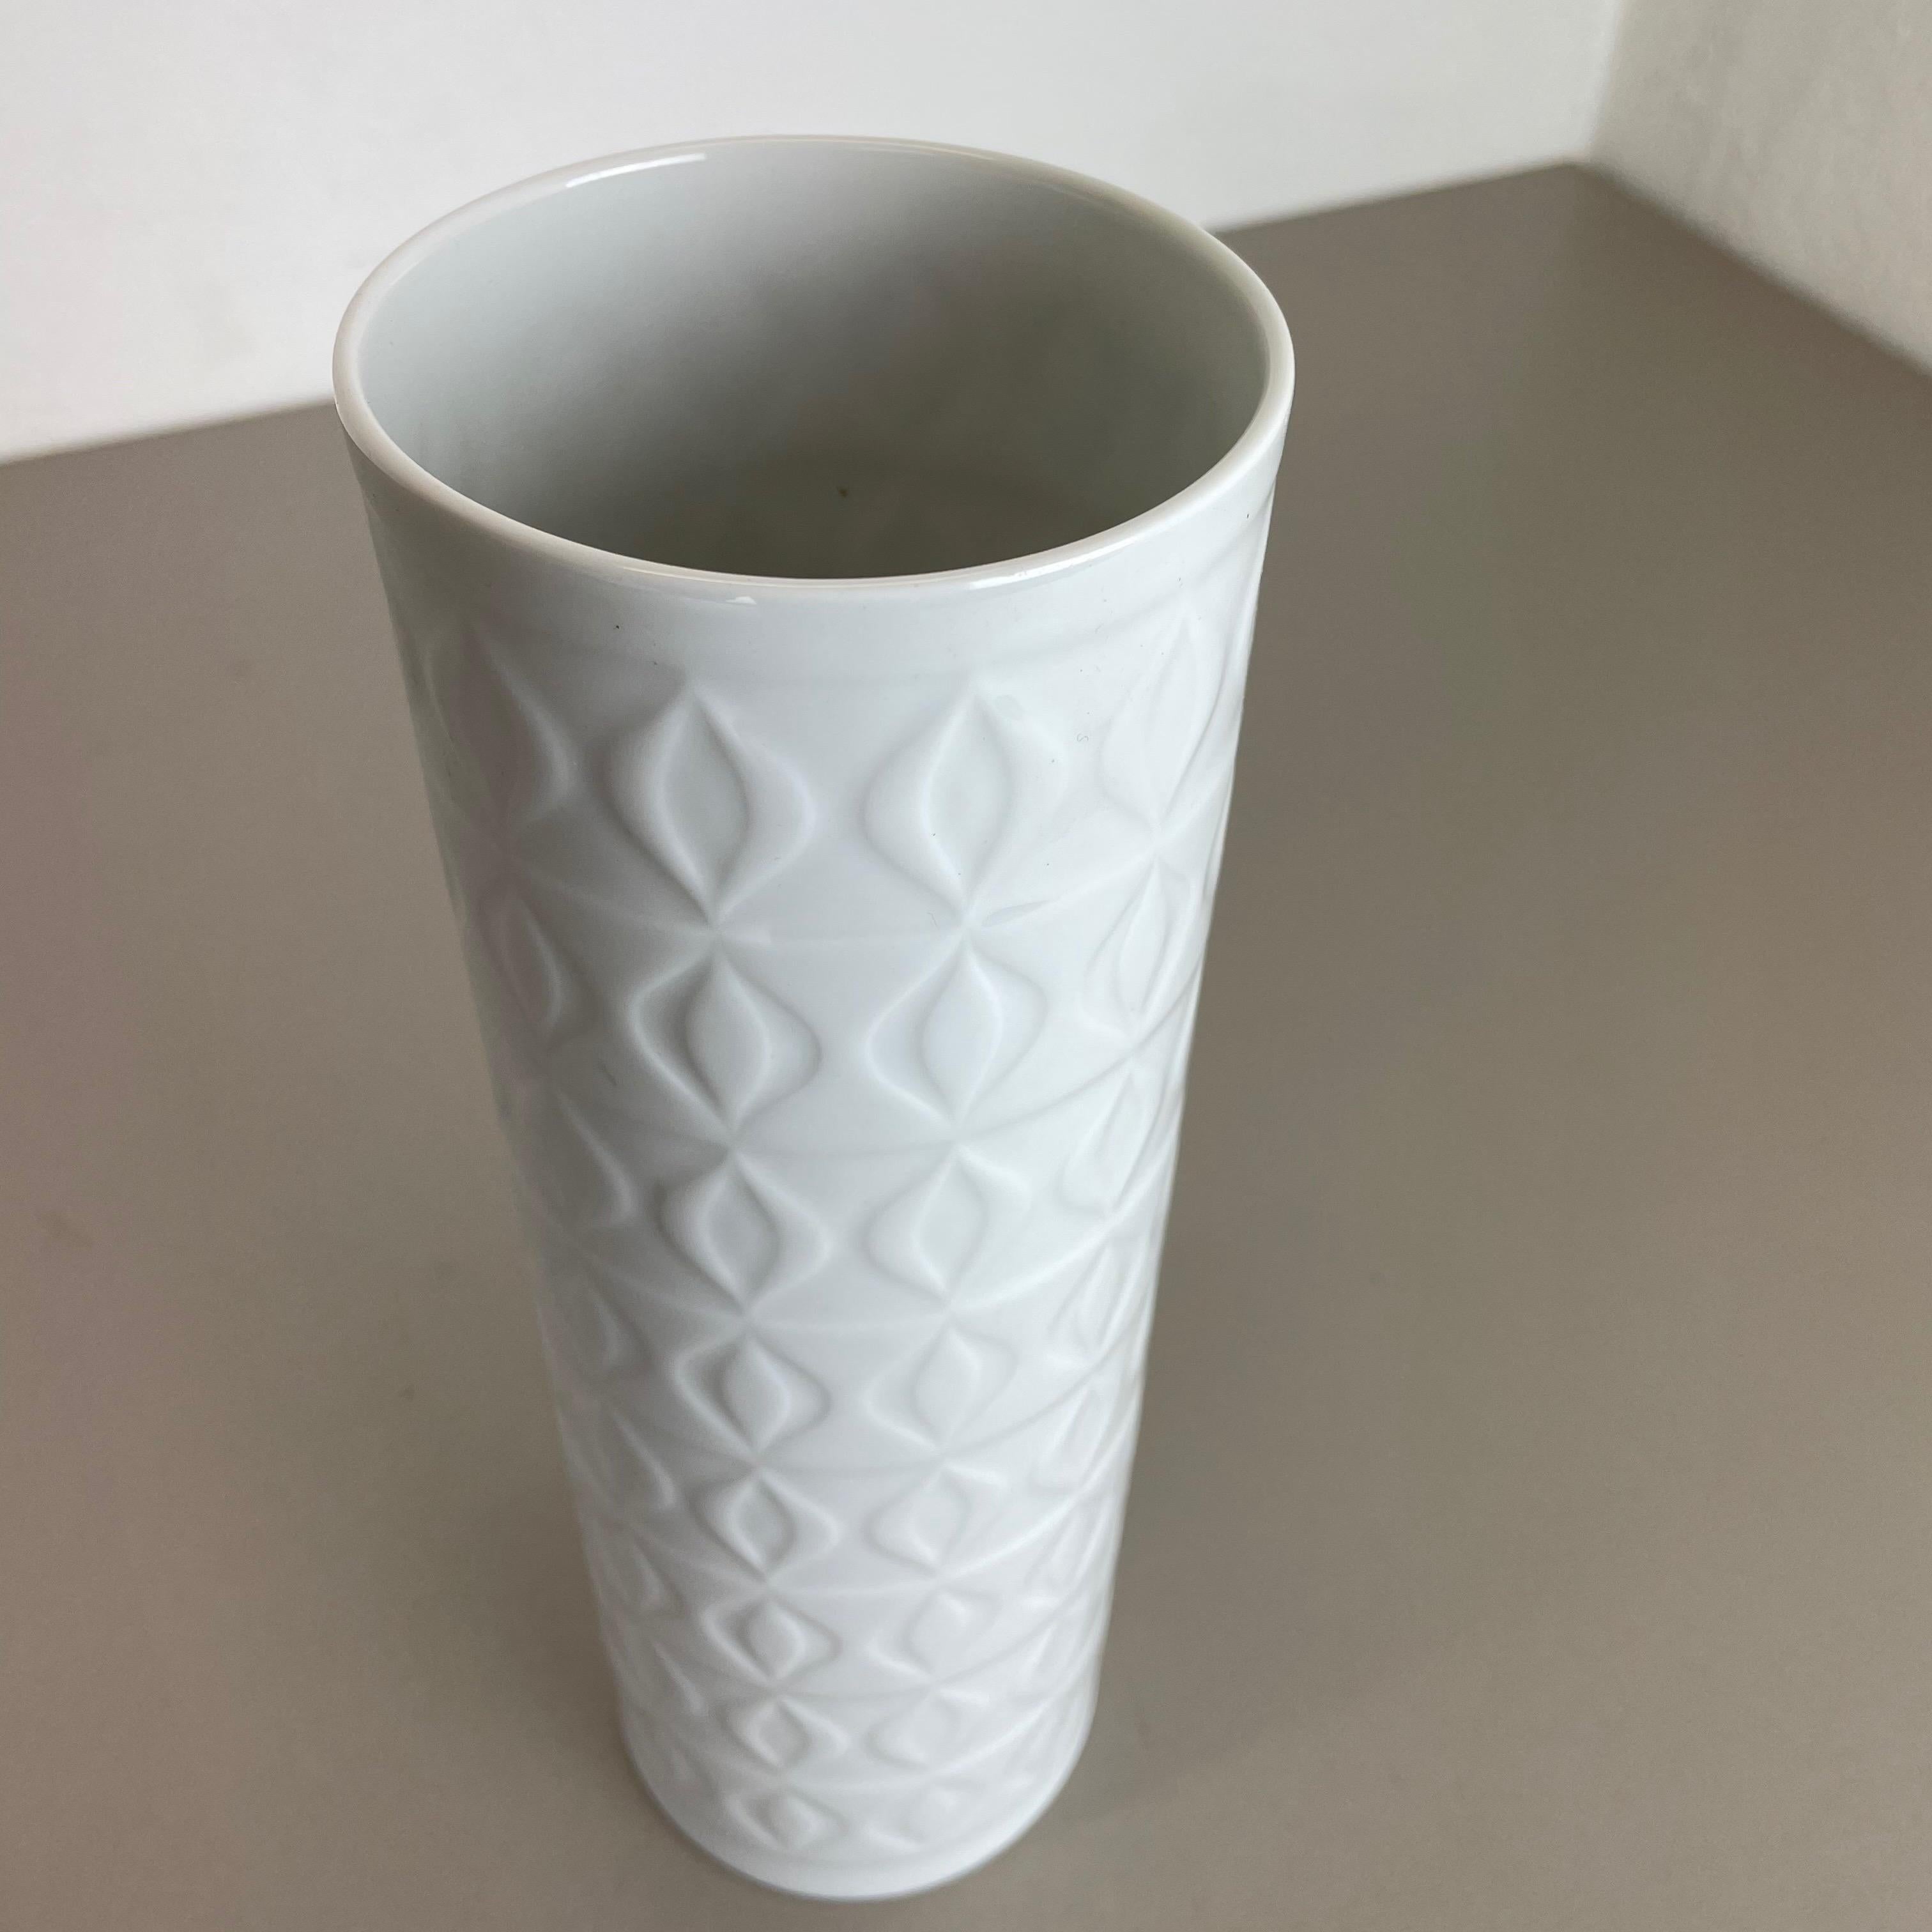 Large 1970s OP Art Biscuit Porcelain German Vase Made by AK Kaiser, Germany In Good Condition For Sale In Kirchlengern, DE